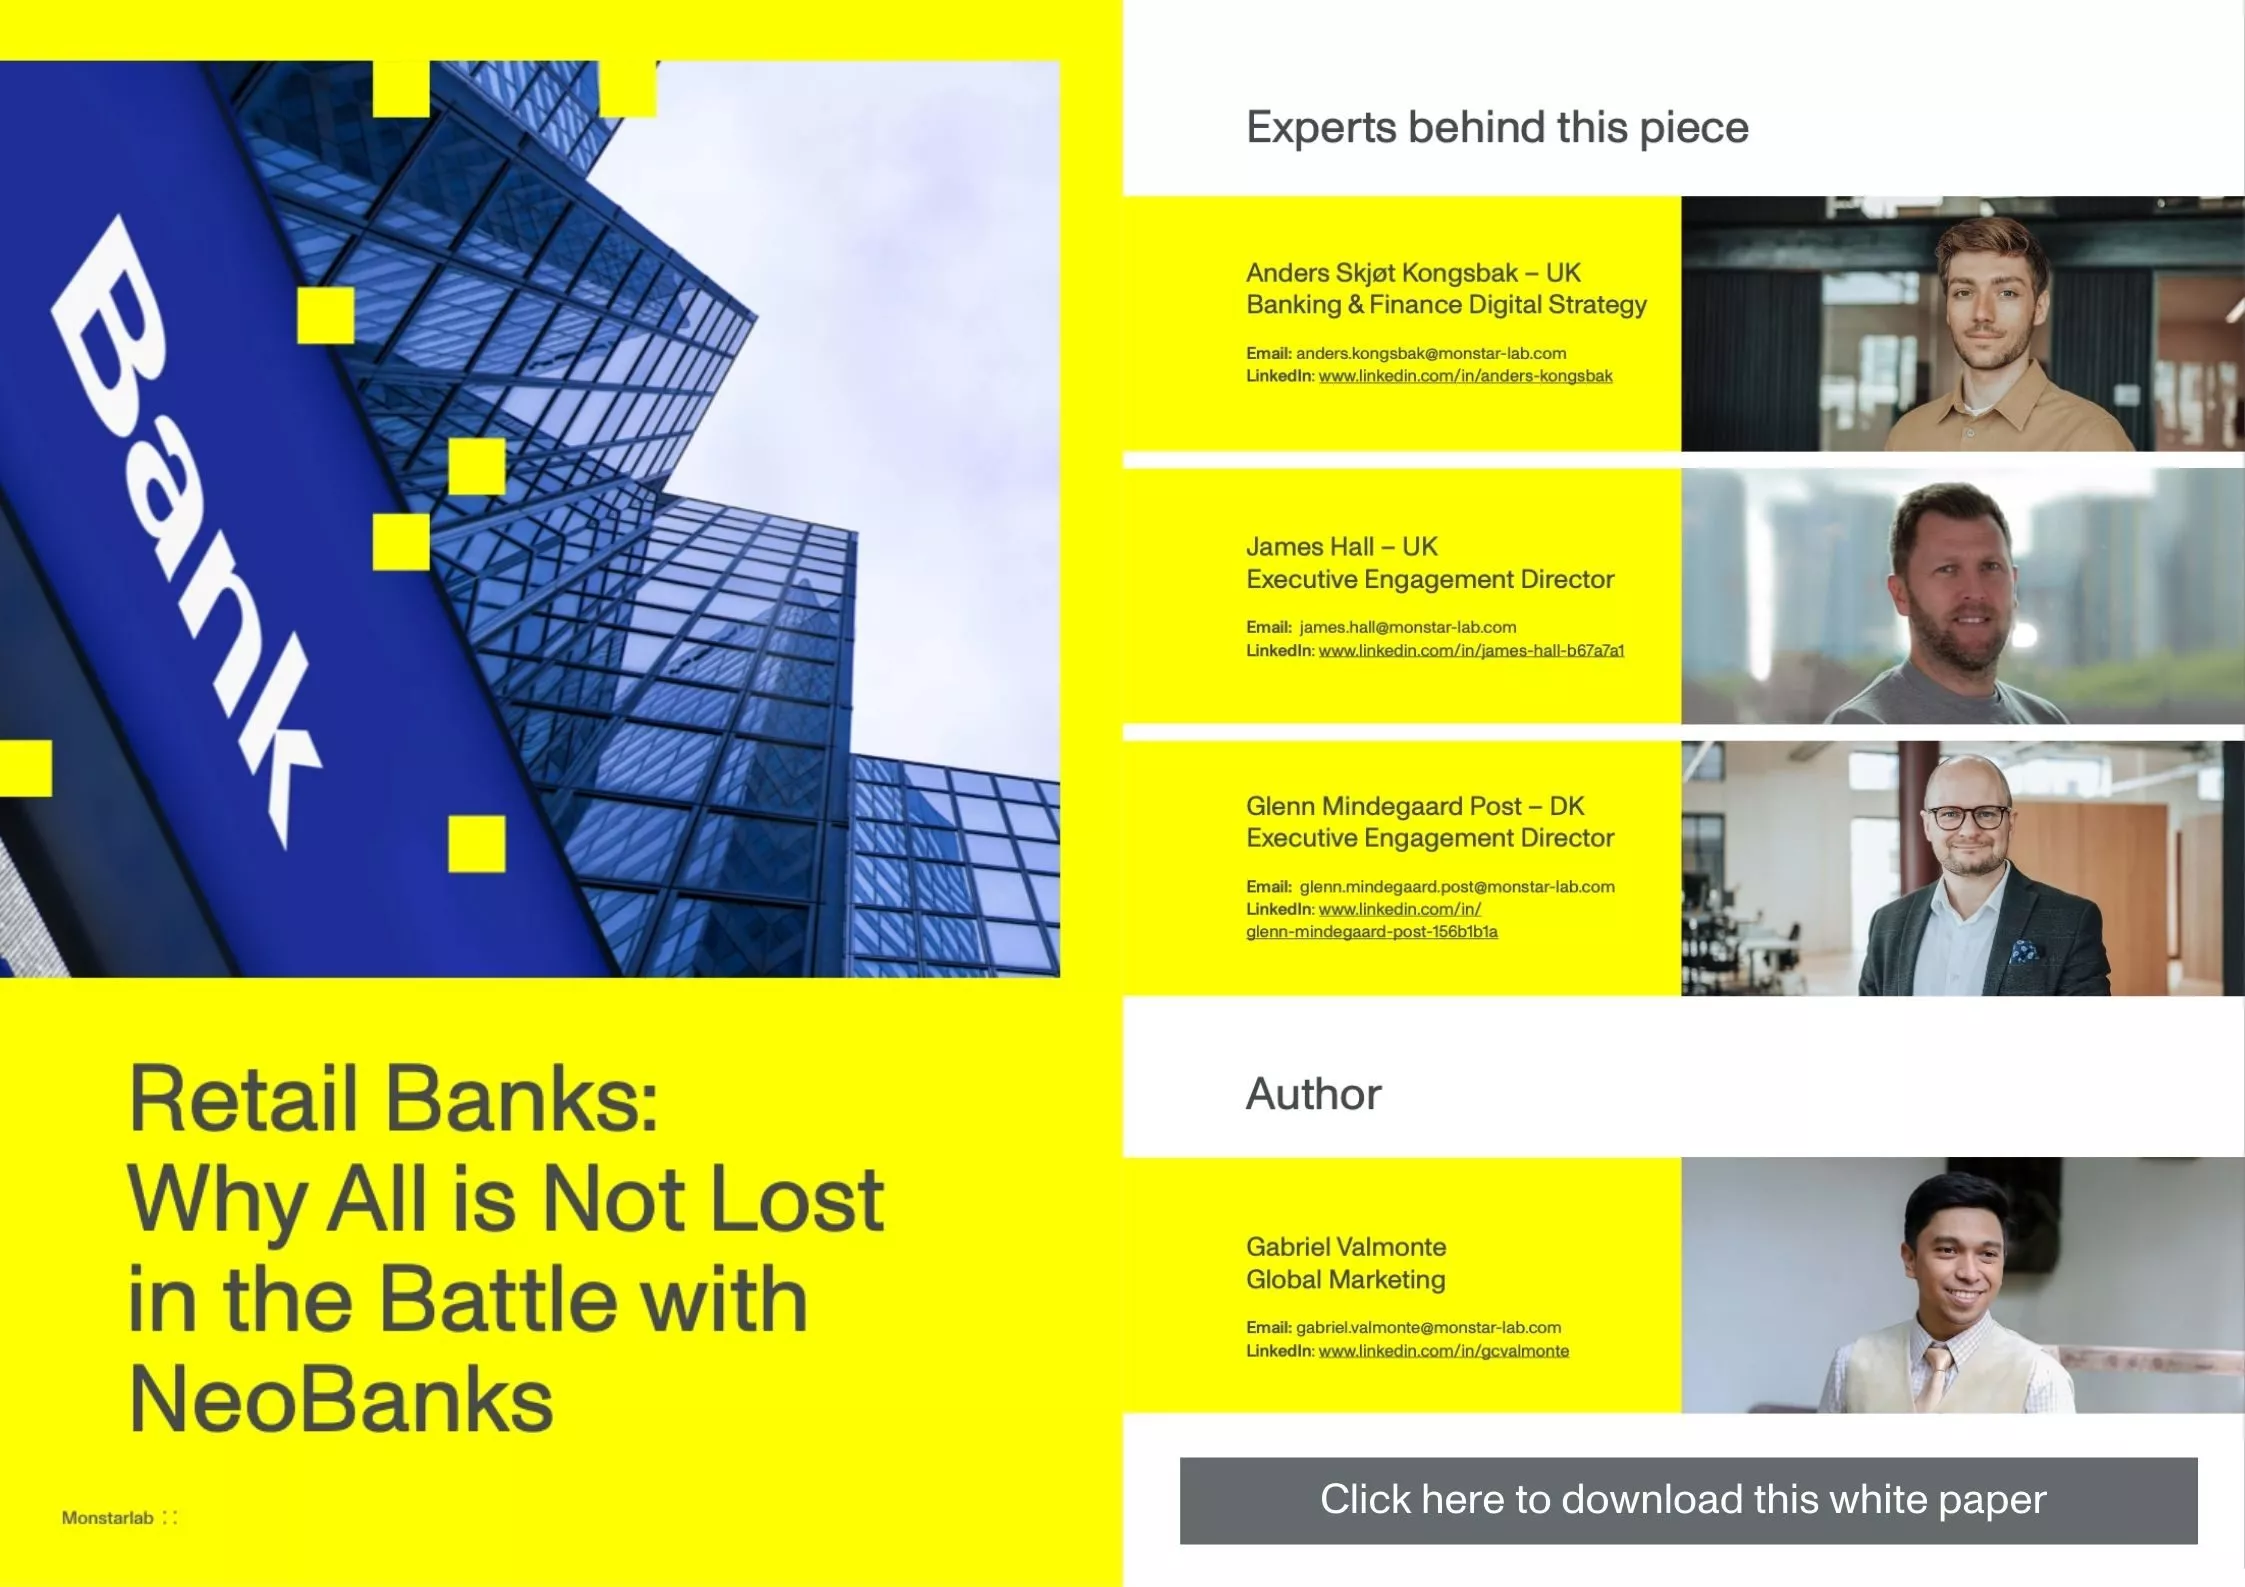 Retail Banks: Why All is Not Lost in the Battle with NeoBanks